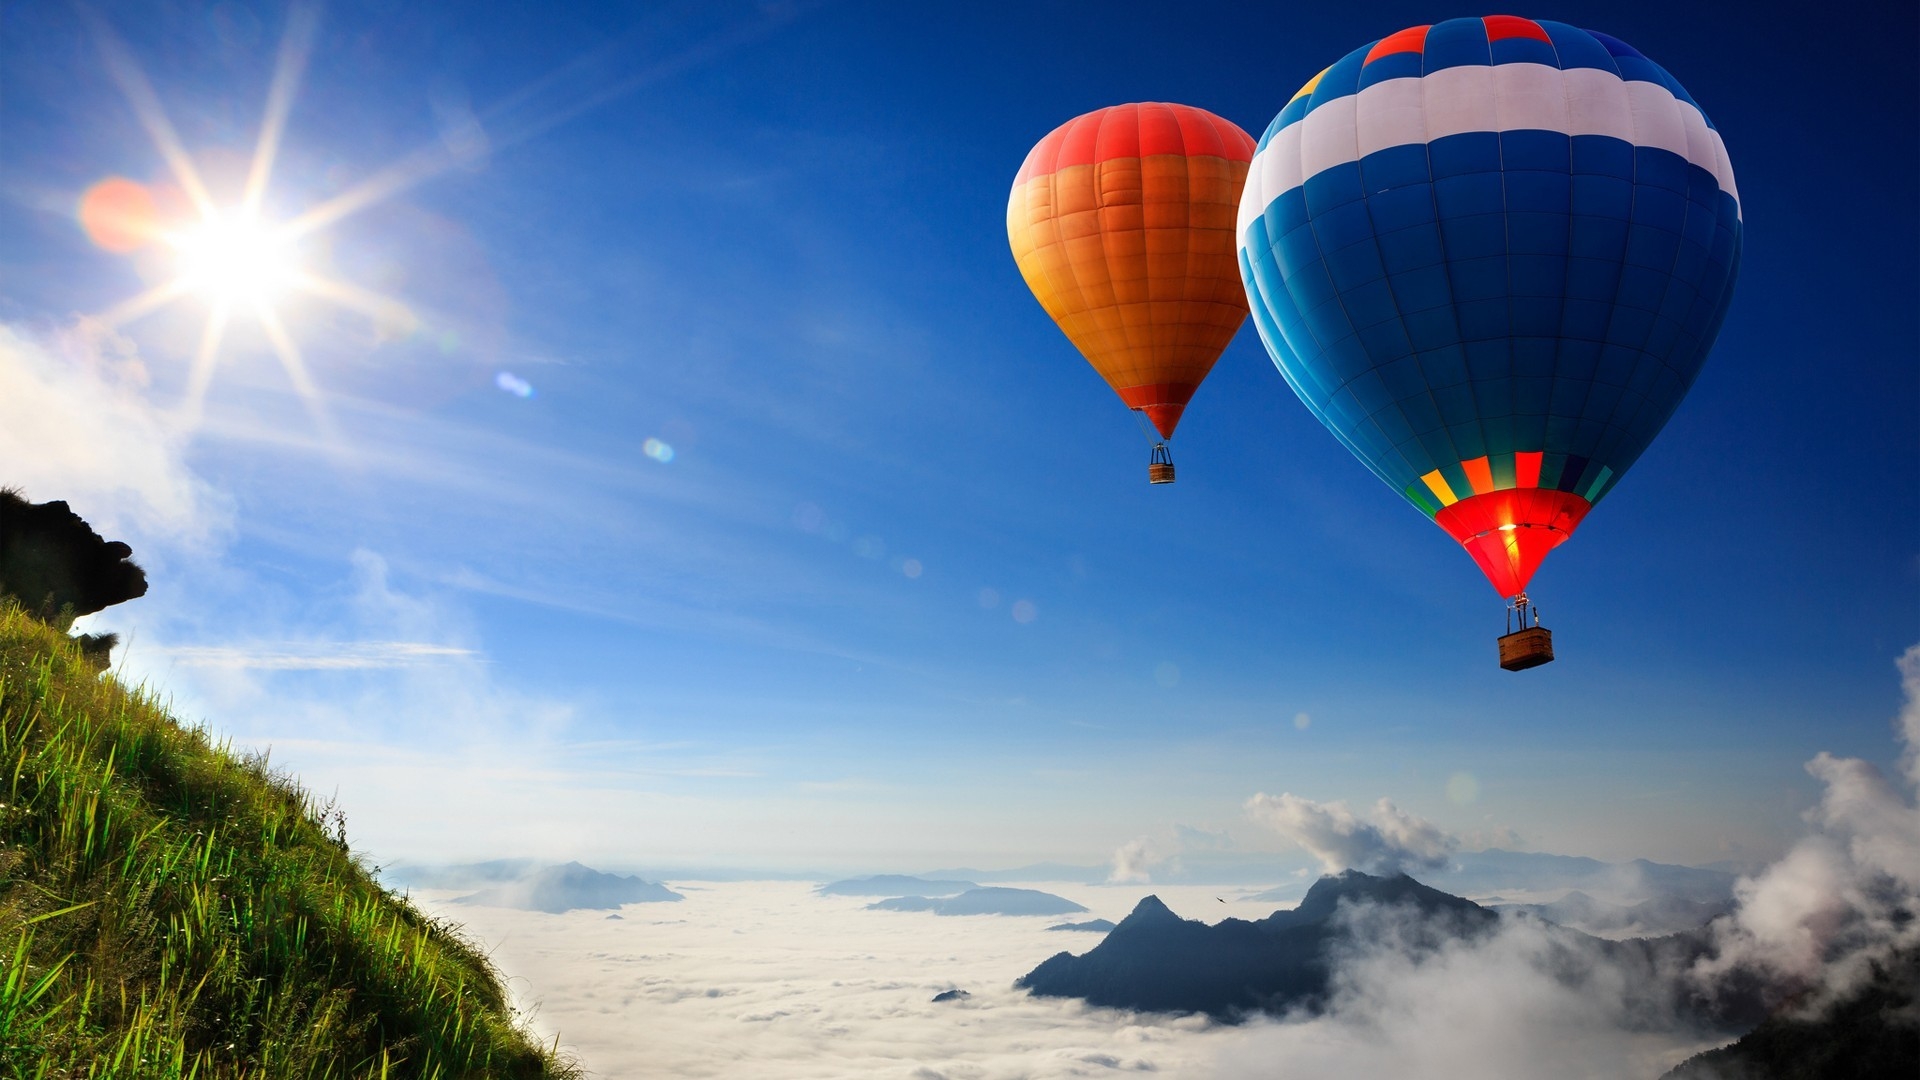 Hot Air Balloons for 1920 x 1080 HDTV 1080p resolution